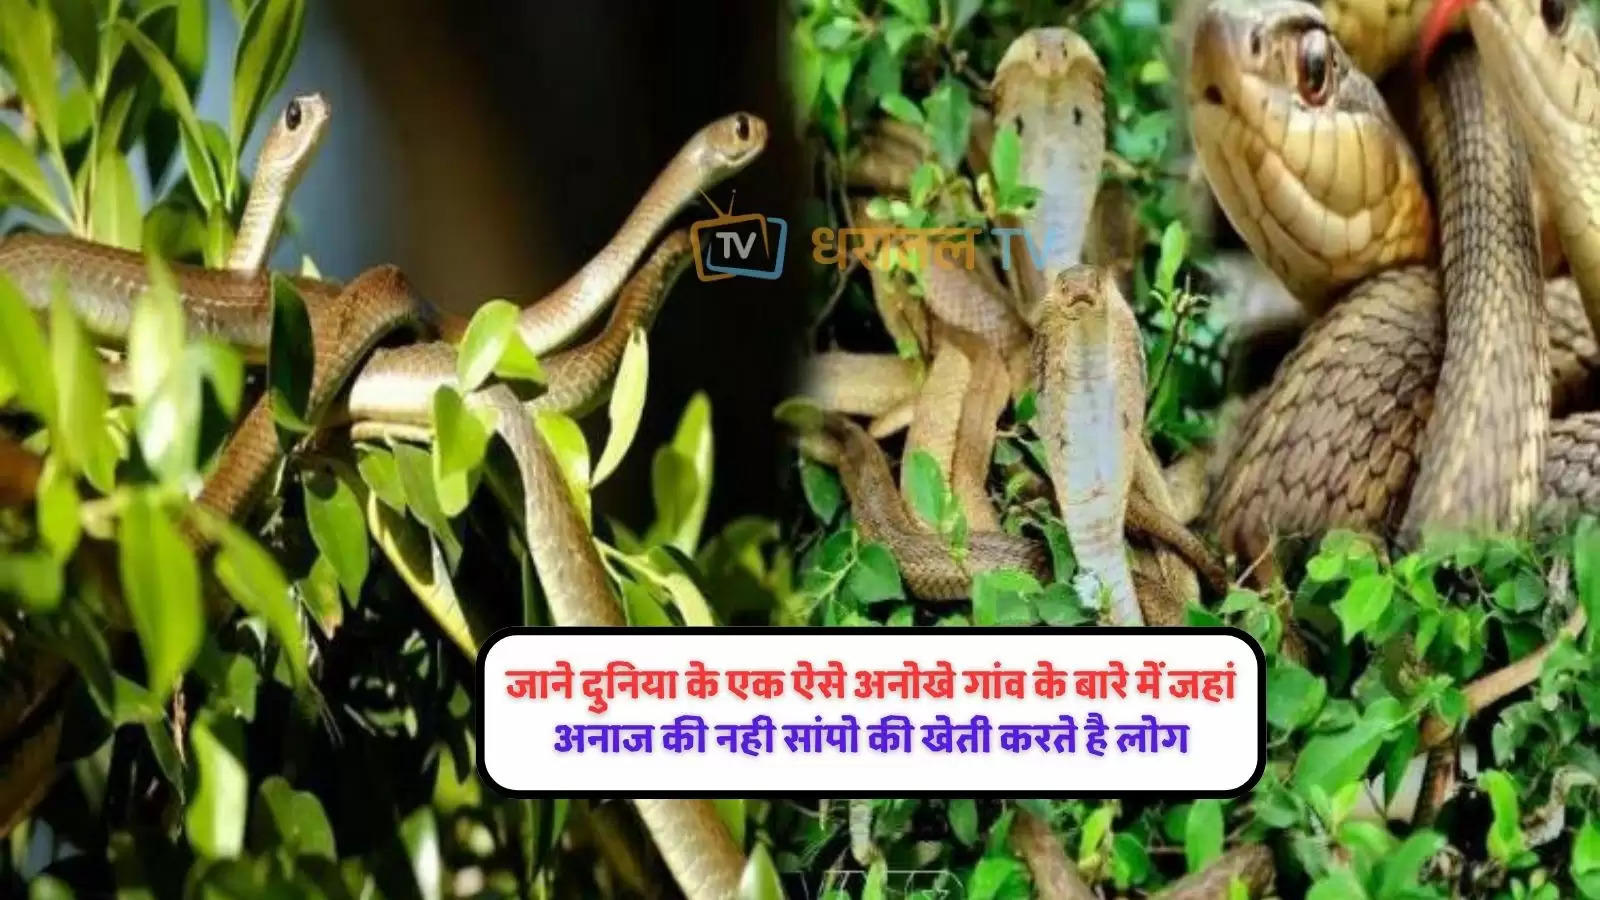 this-is-the-worlds-most-unique-village-where-poisonous-snakes-are-cultivated-instead-of-grains